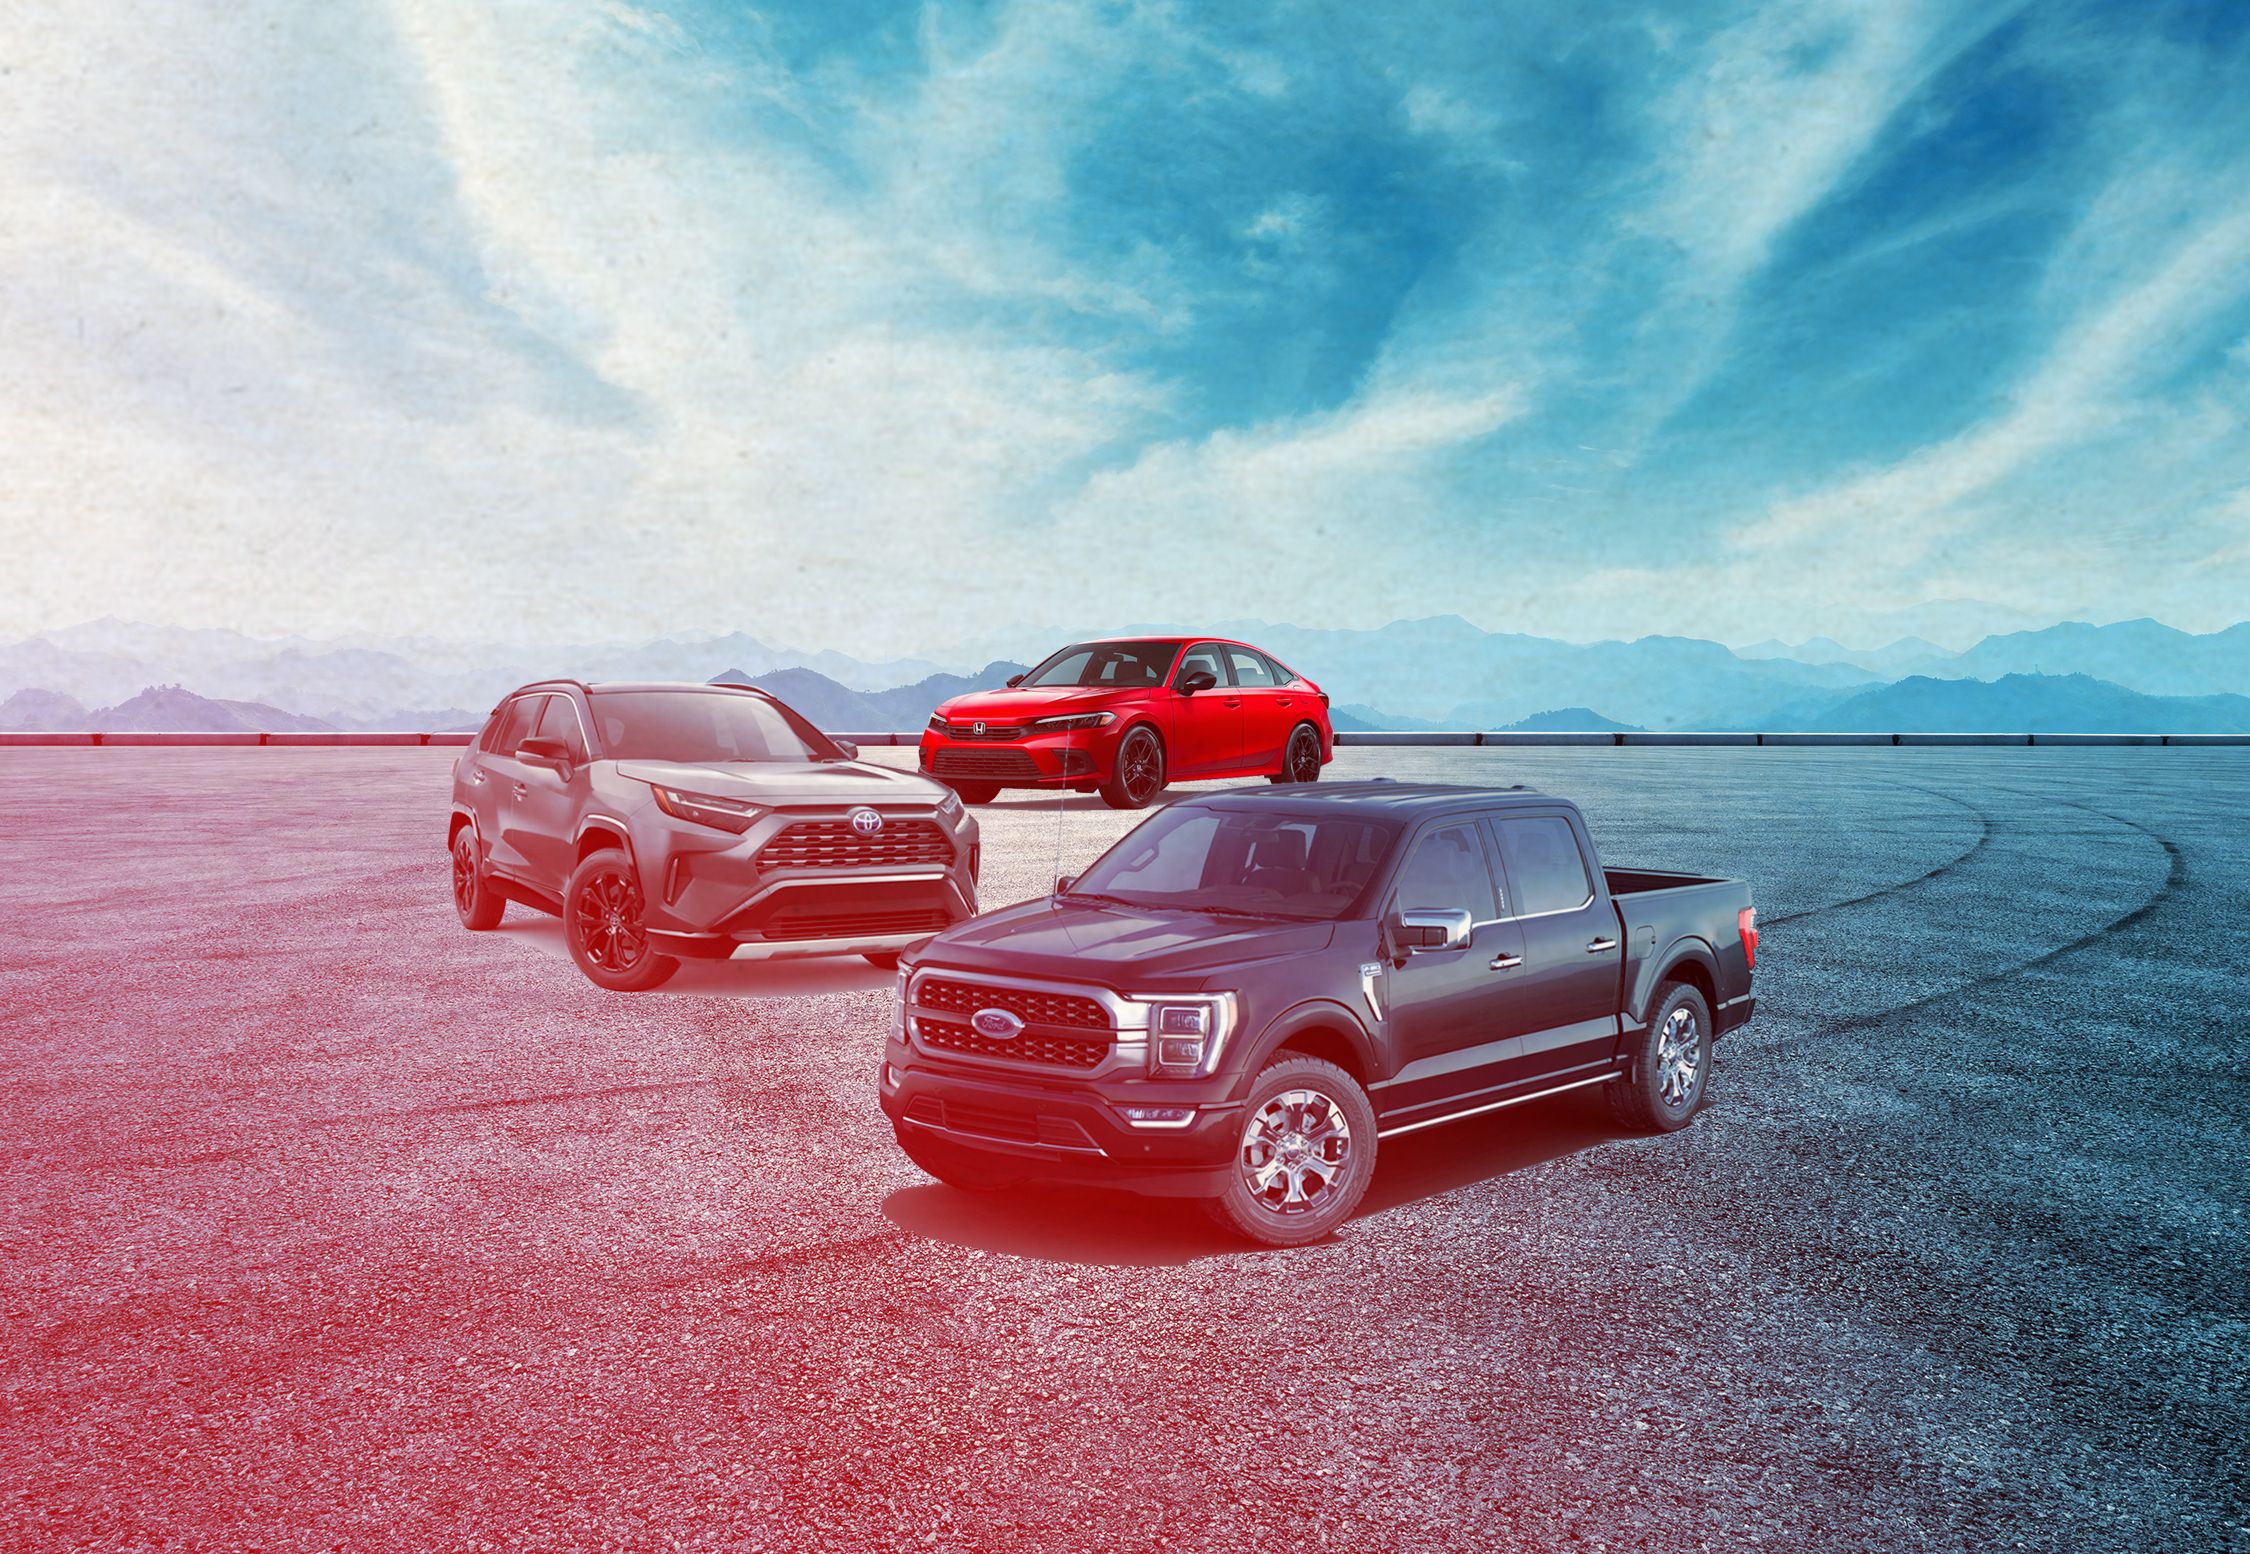 The 25 Bestselling Cars, Trucks, and SUVs of 2022